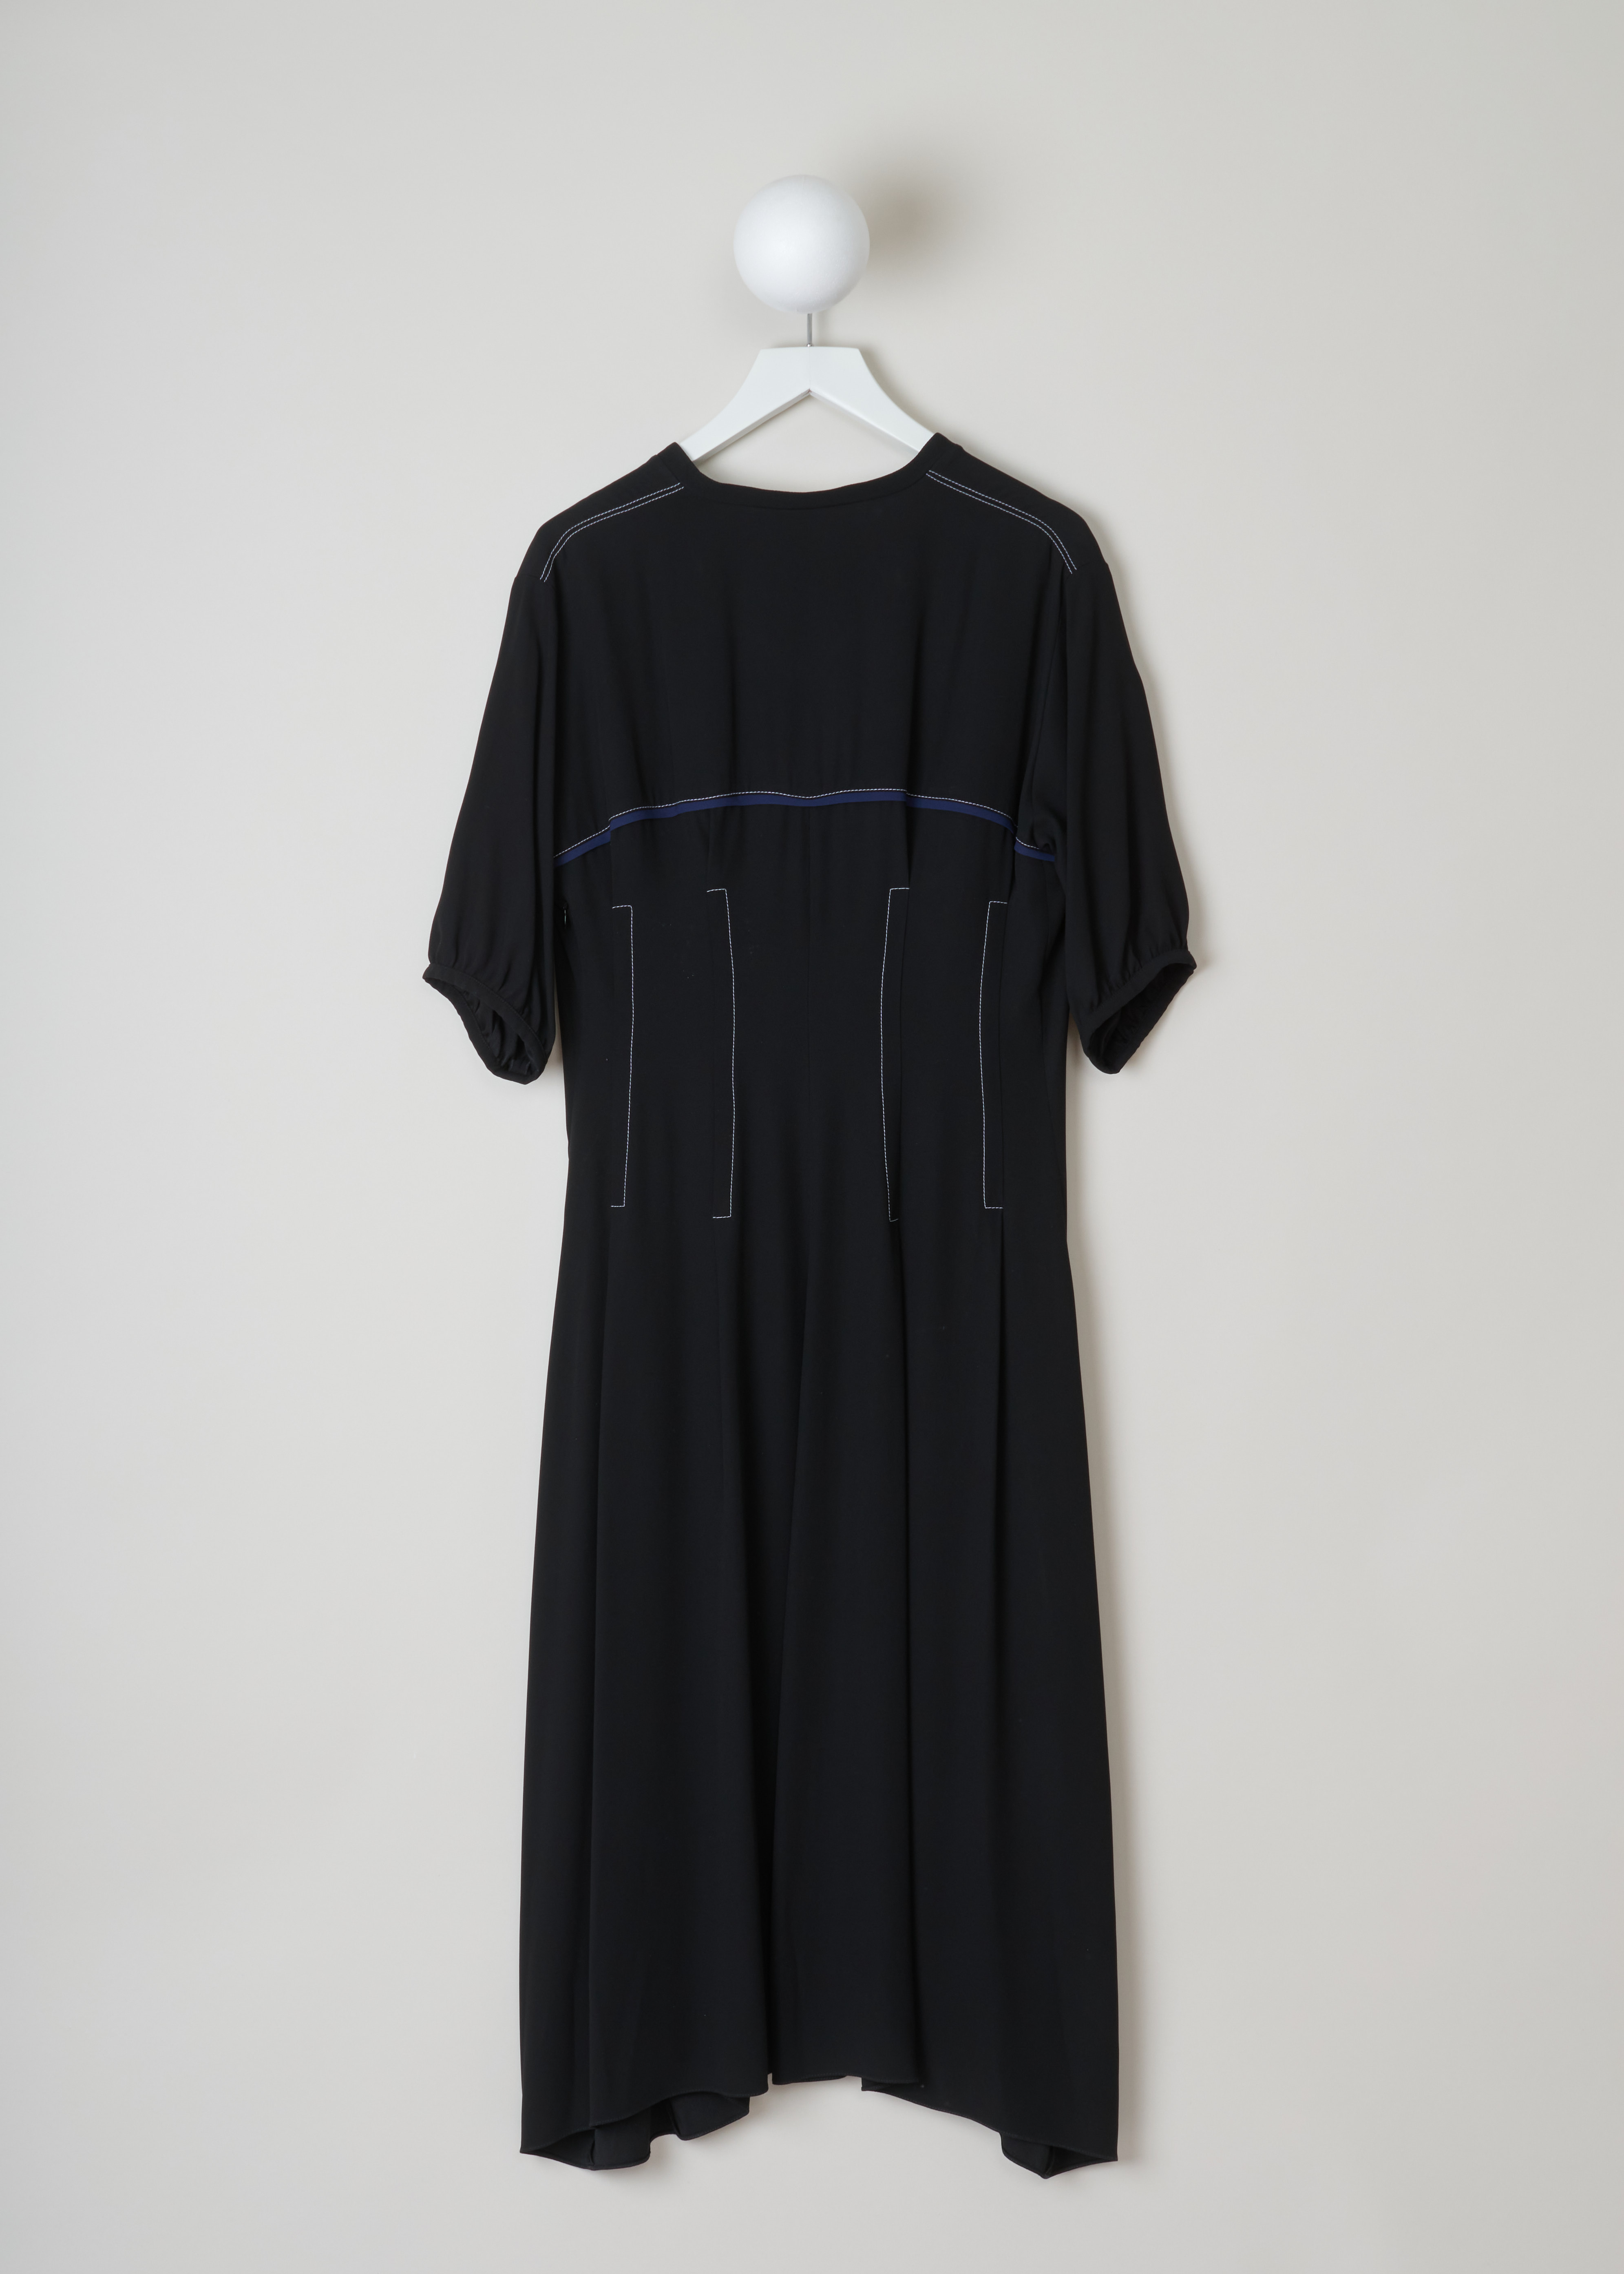 Marni Contrast stitch flared dress black ABMA032910_TV285_00N99_BLACK back. Flared black midi-dress with white contrasting topstitching at the waist, blue bias on the chest, a V-neck, short puff sleeves and an irregular hemline.